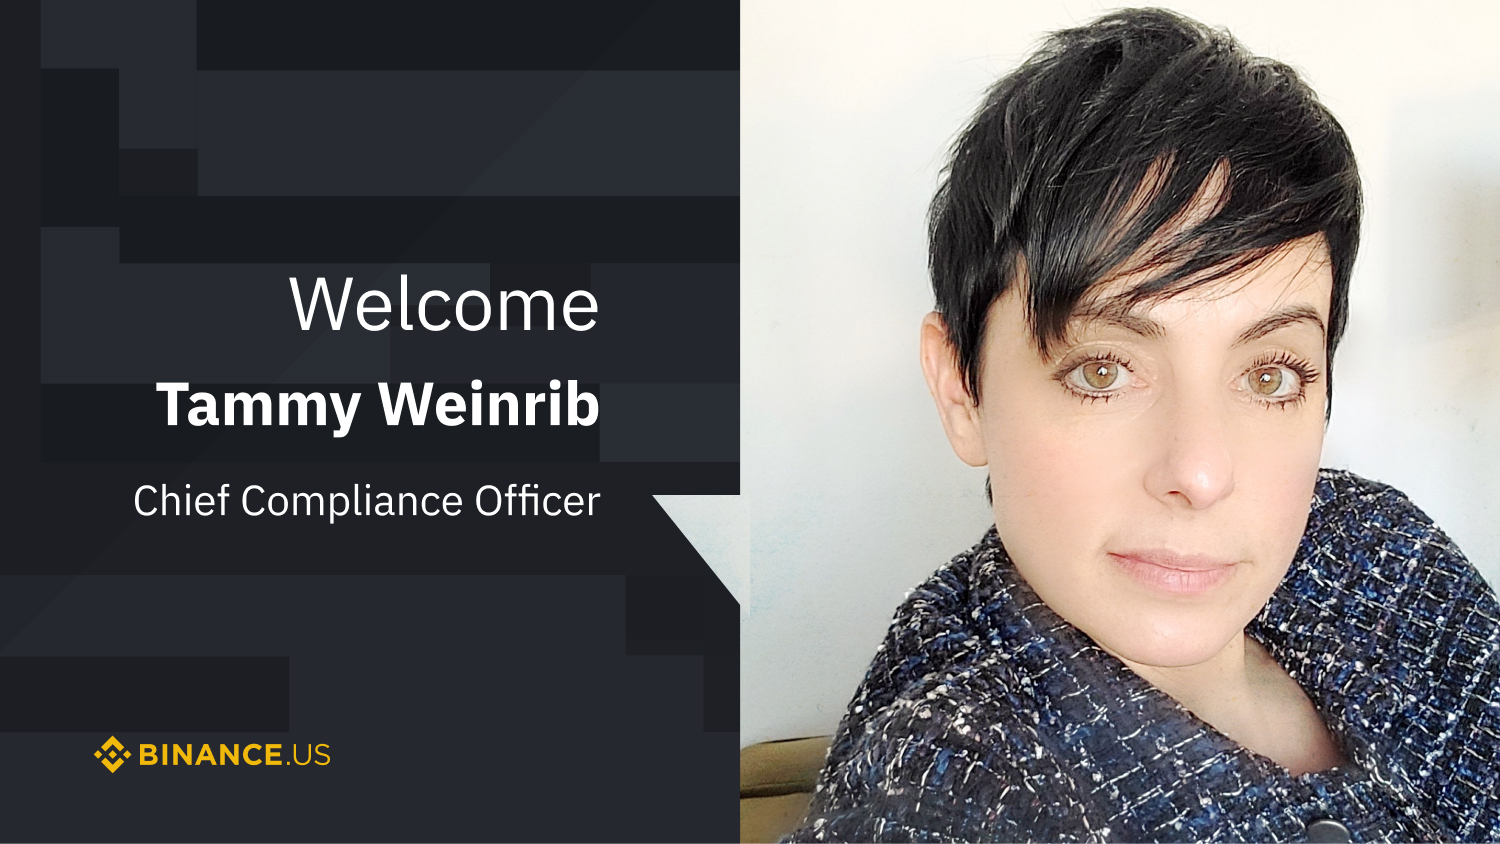 Tammy Weinrib Joins Binance.US as Chief Compliance Officer